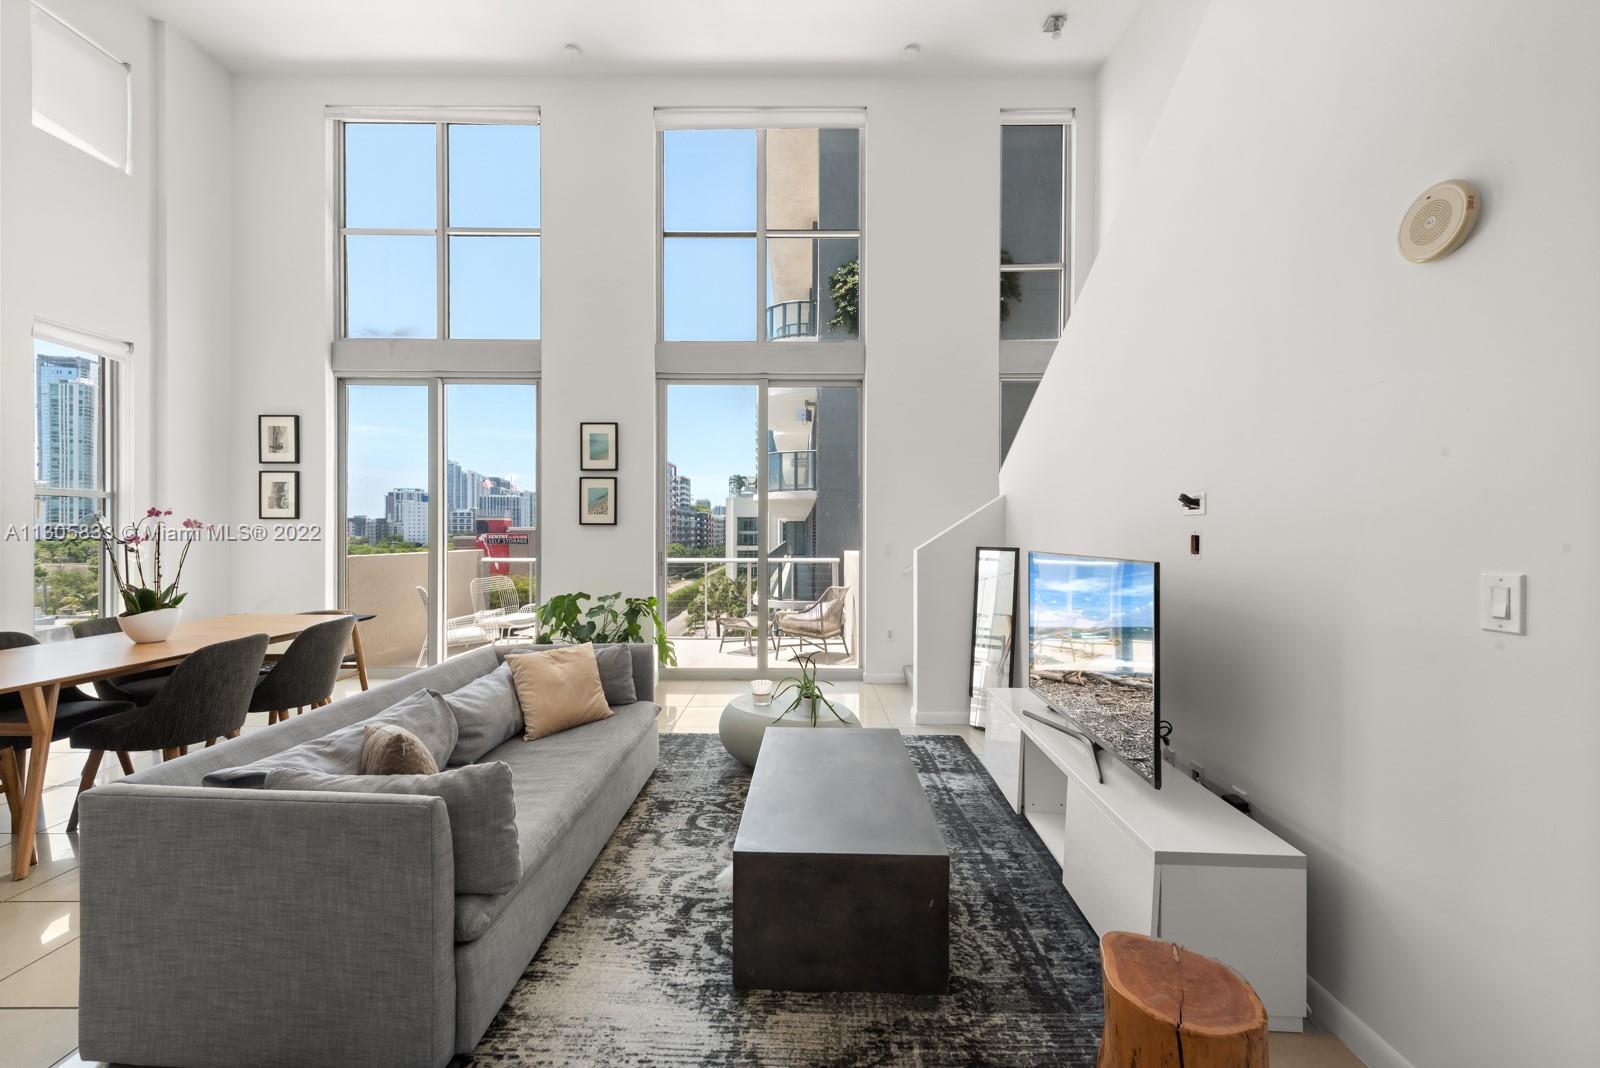 Zoned LIVE-WORK, this LOFT at 2 Midtown is ideal for a live-work lifestyle with 2 covered parking sp